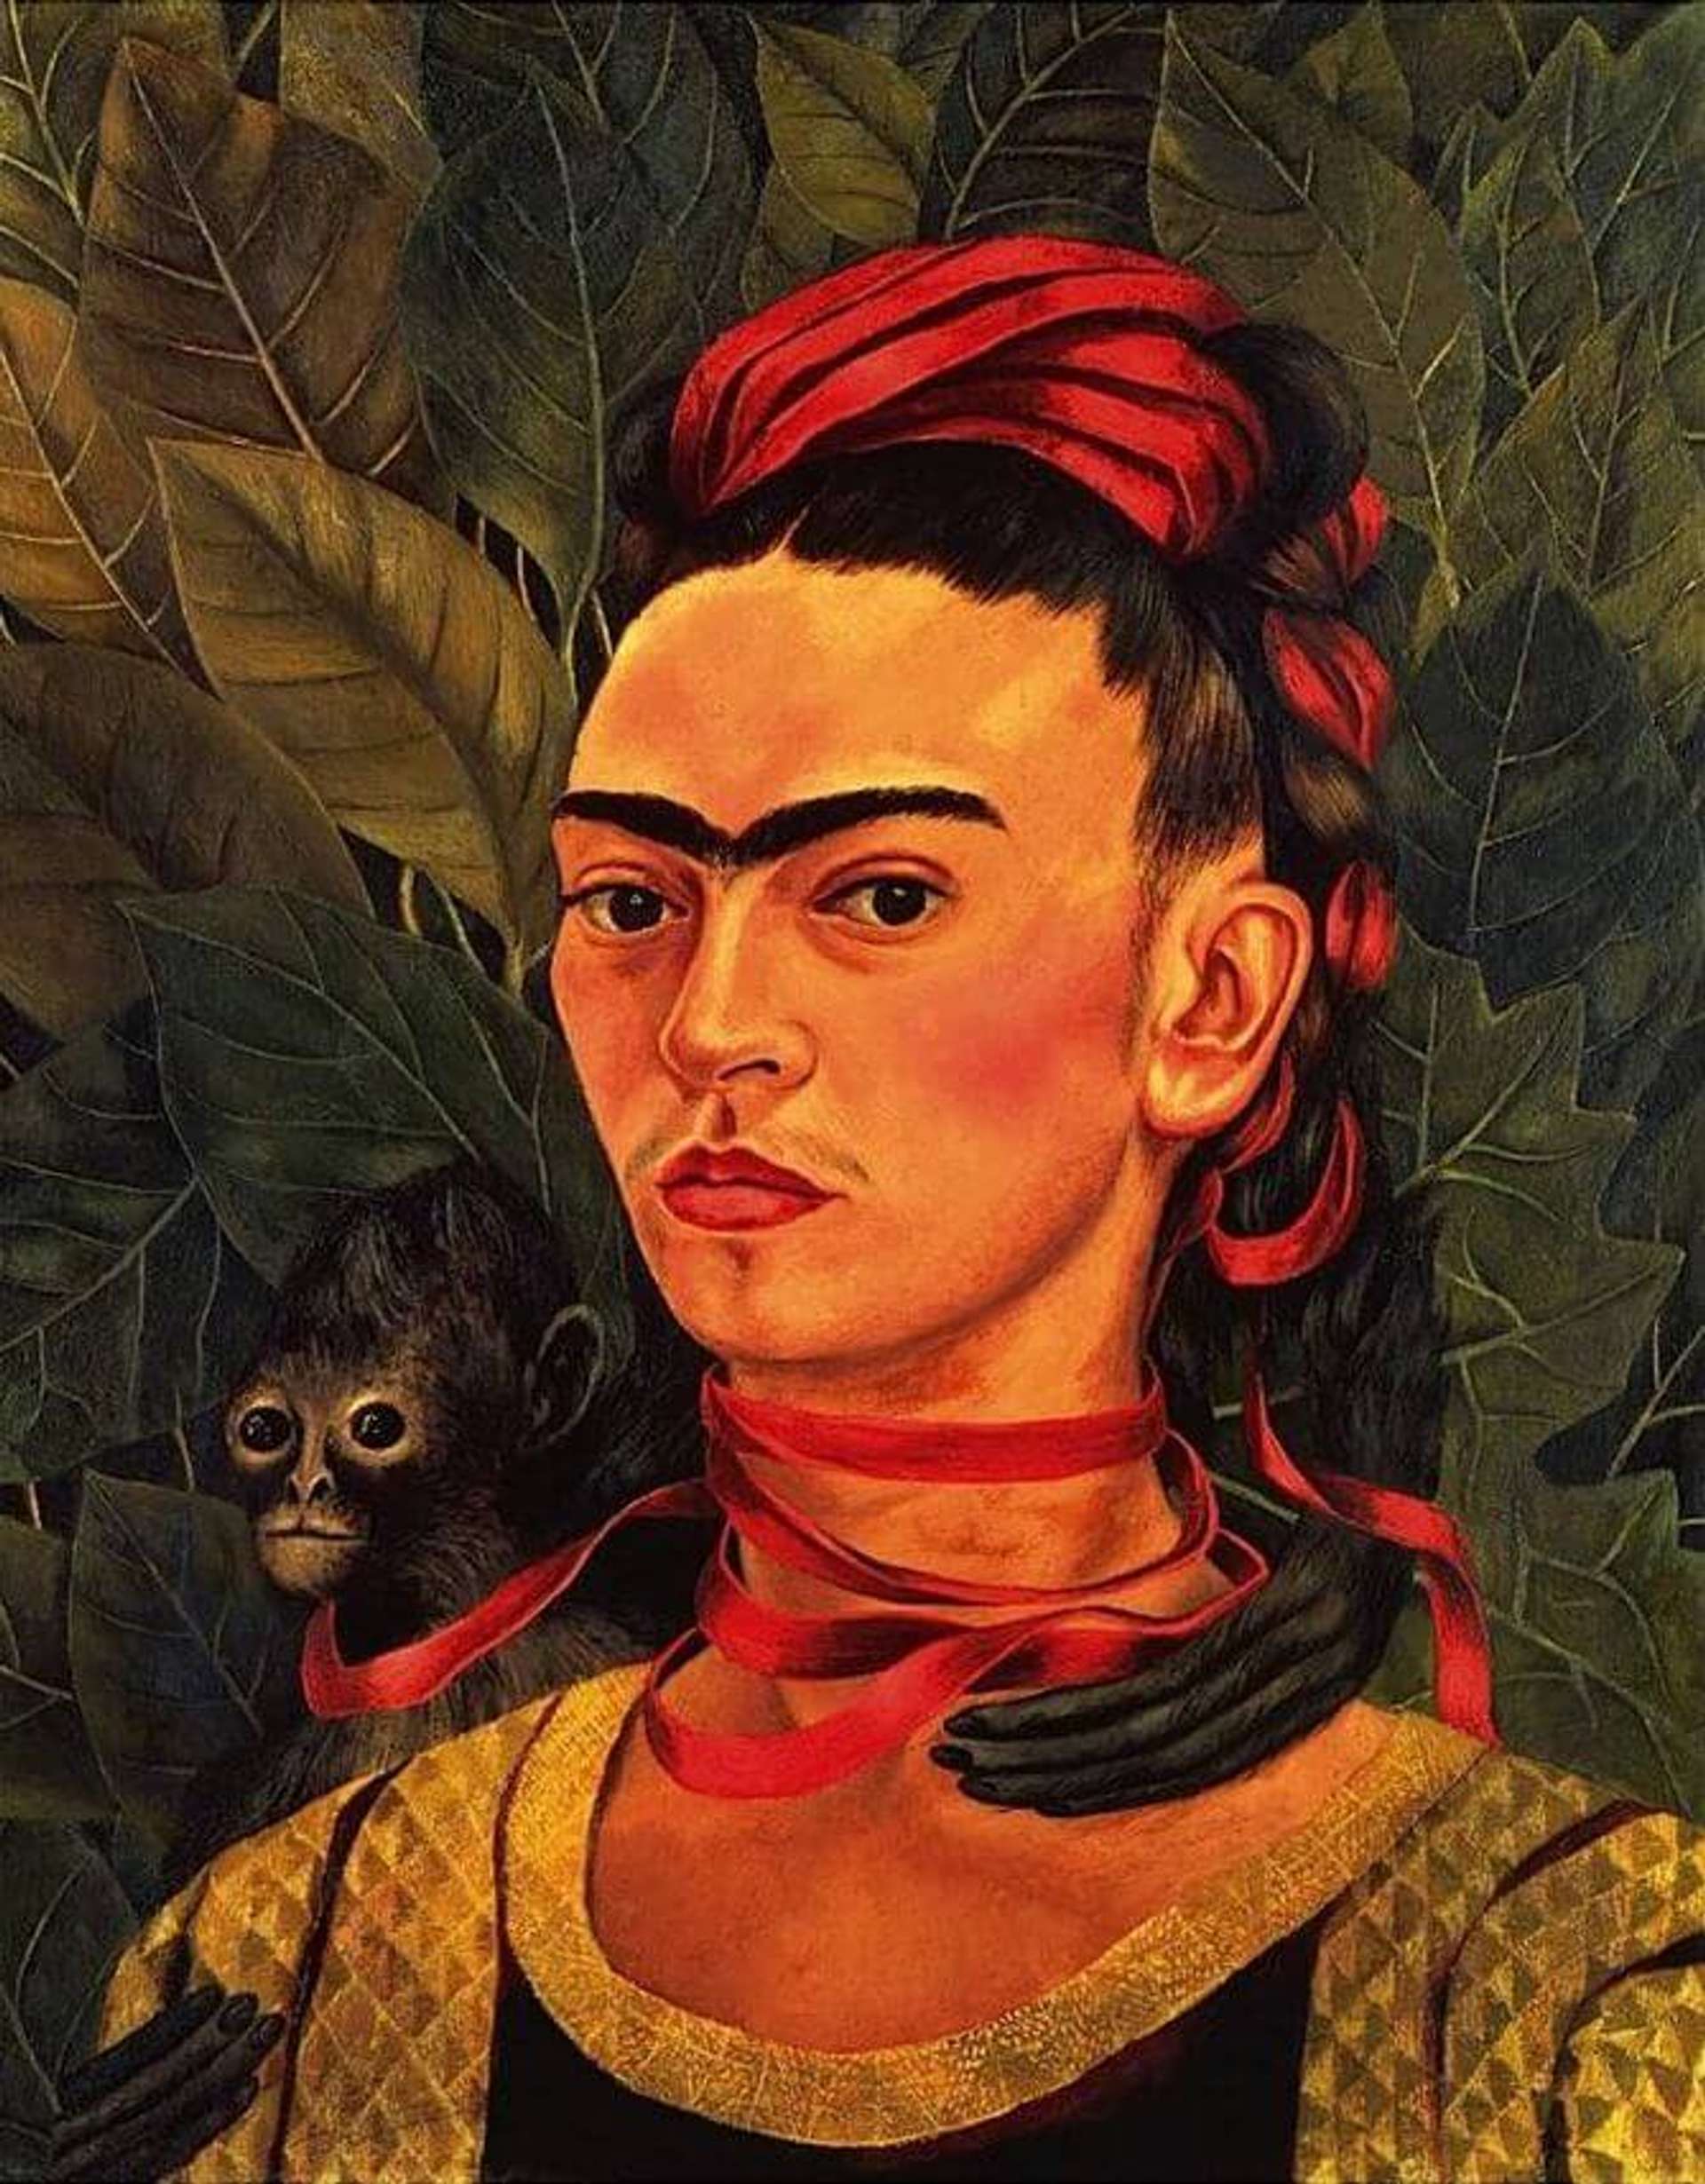 Frida Kahlo’s Self Portrait With Monkey. A painting of Frida Kahlo wearing a red ribbon in her hair that comes down to wrap around her neck, and the neck of the monkey beside her.